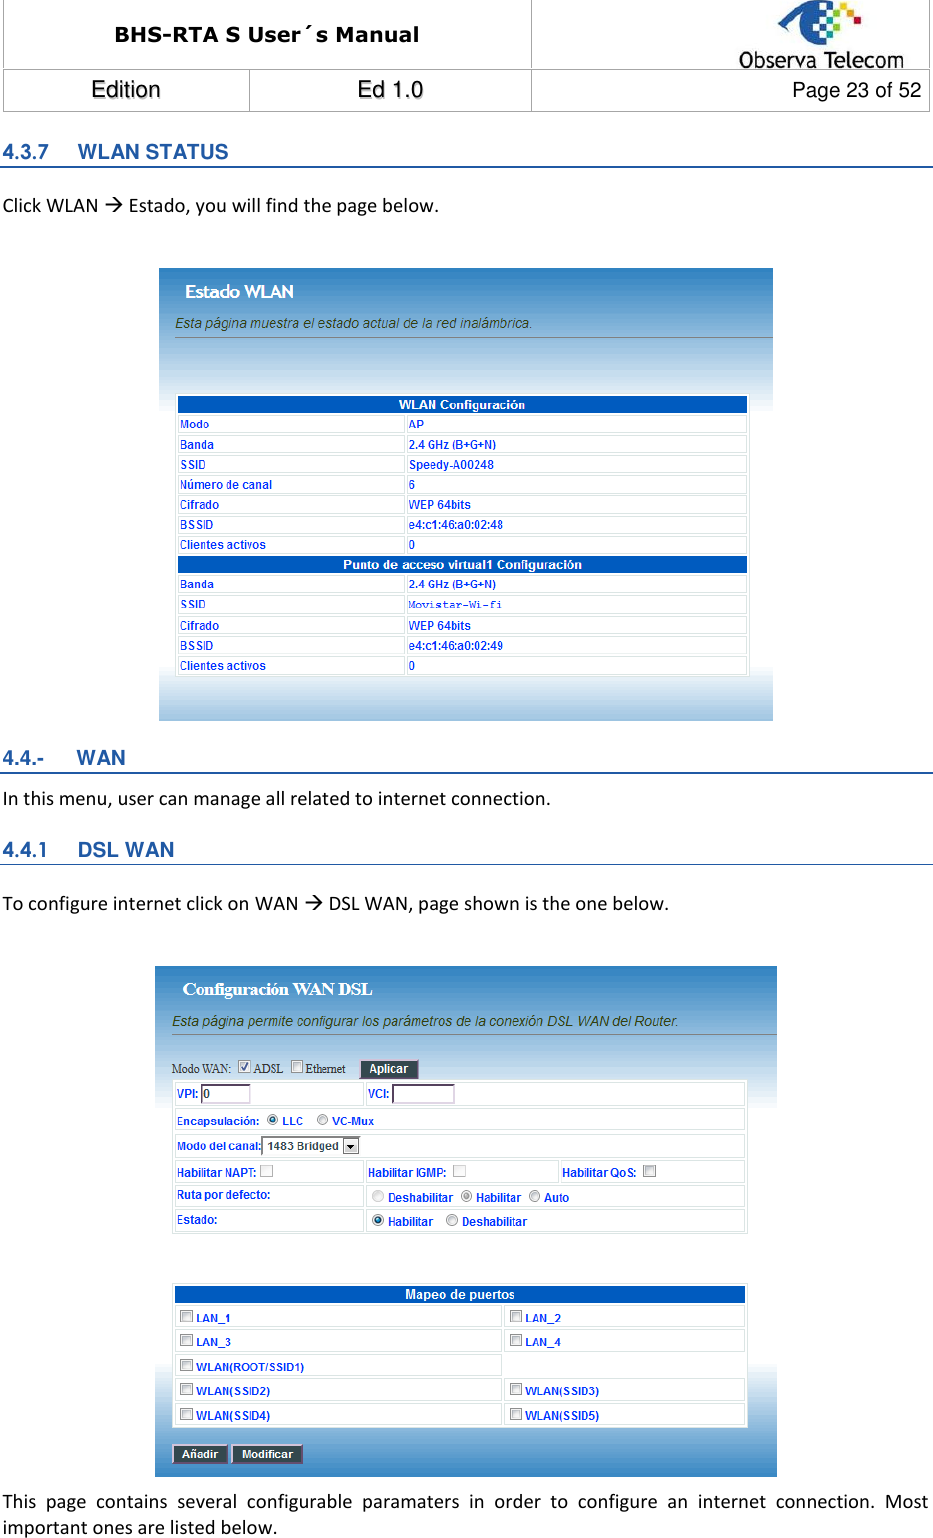 BHS-RTA S User´s Manual  EEddiittiioonn  EEdd  11..00  Page 23 of 52  4.3.7  WLAN STATUS Click WLAN  Estado, you will find the page below.   4.4.-   WAN In this menu, user can manage all related to internet connection. 4.4.1  DSL WAN To configure internet click on WAN  DSL WAN, page shown is the one below.   This  page  contains  several  configurable  paramaters  in  order  to  configure  an  internet  connection.  Most important ones are listed below. 